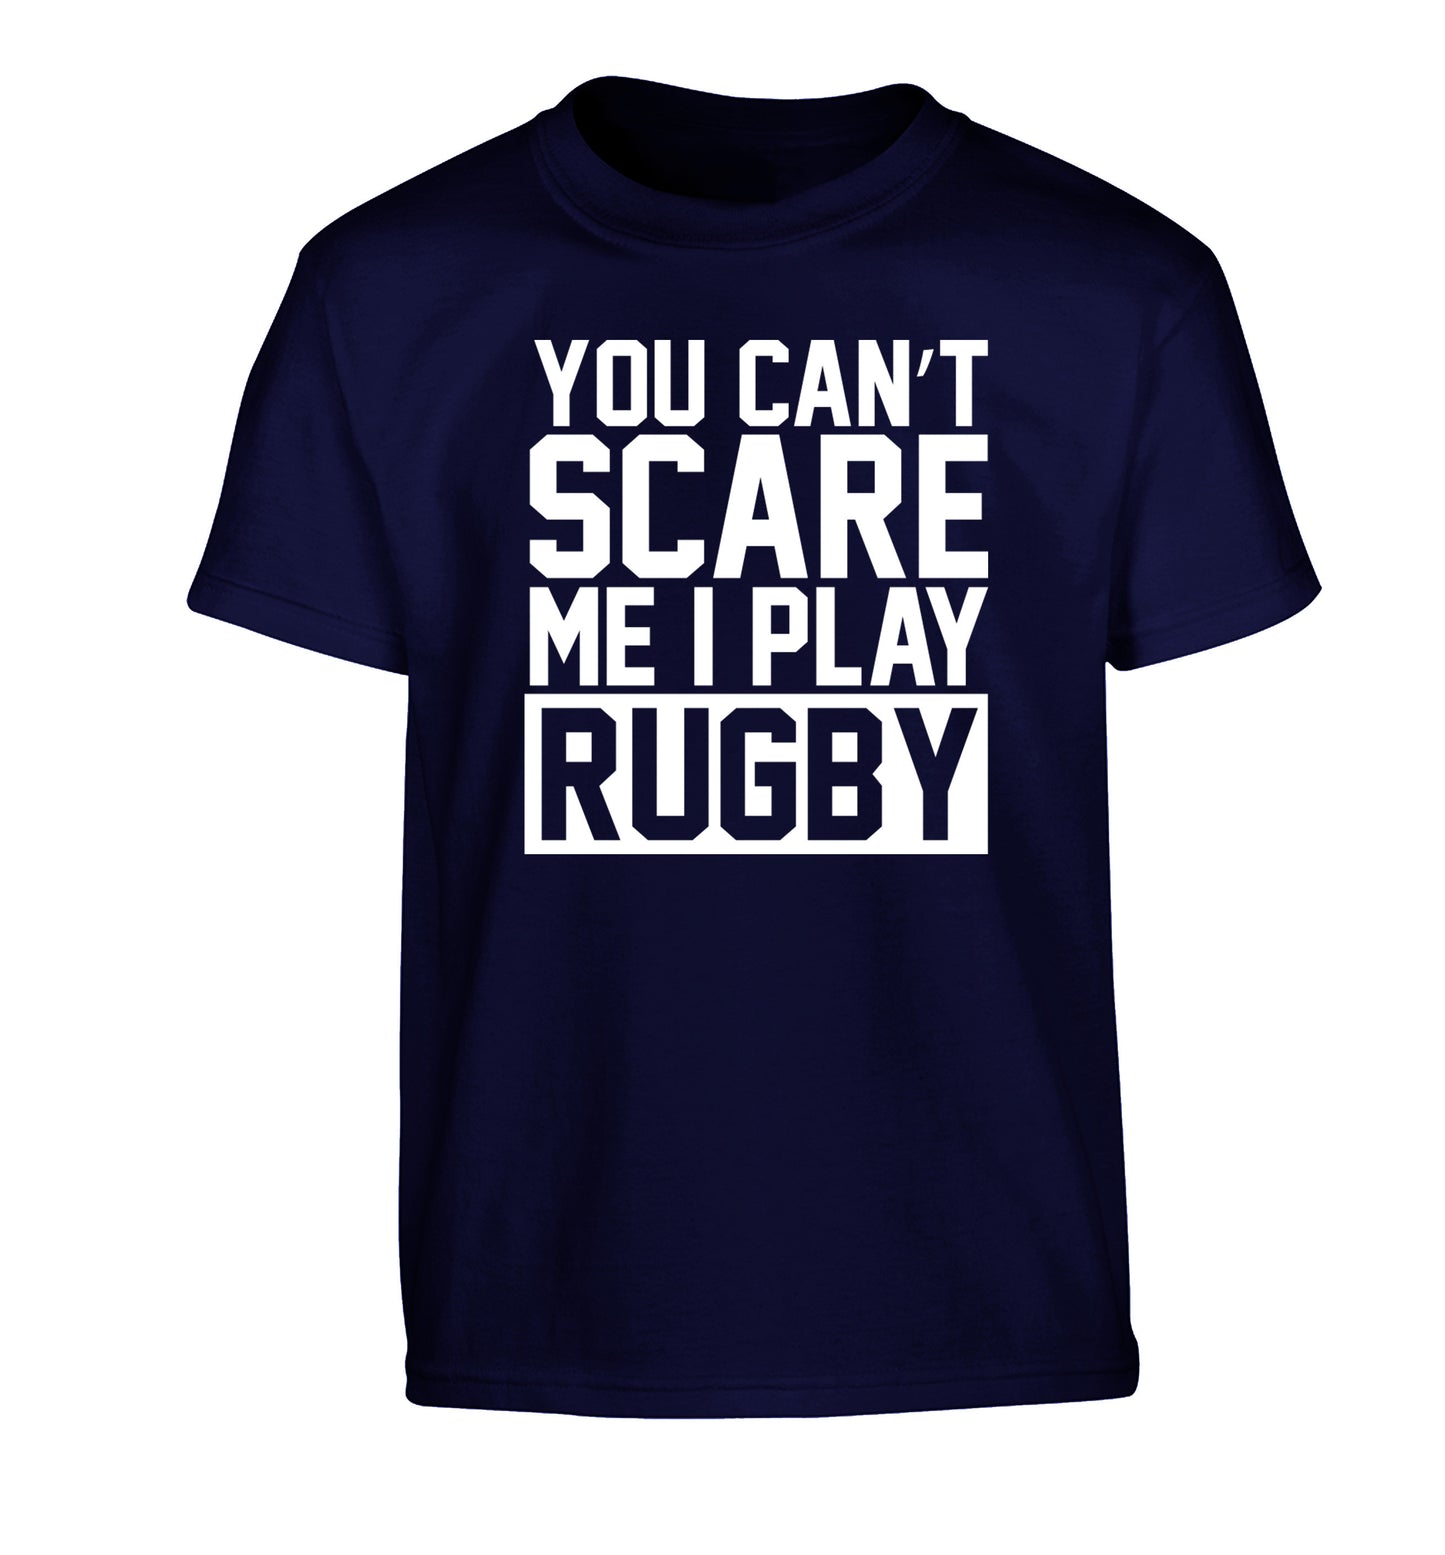 You can't scare me I play rugby Children's navy Tshirt 12-14 Years